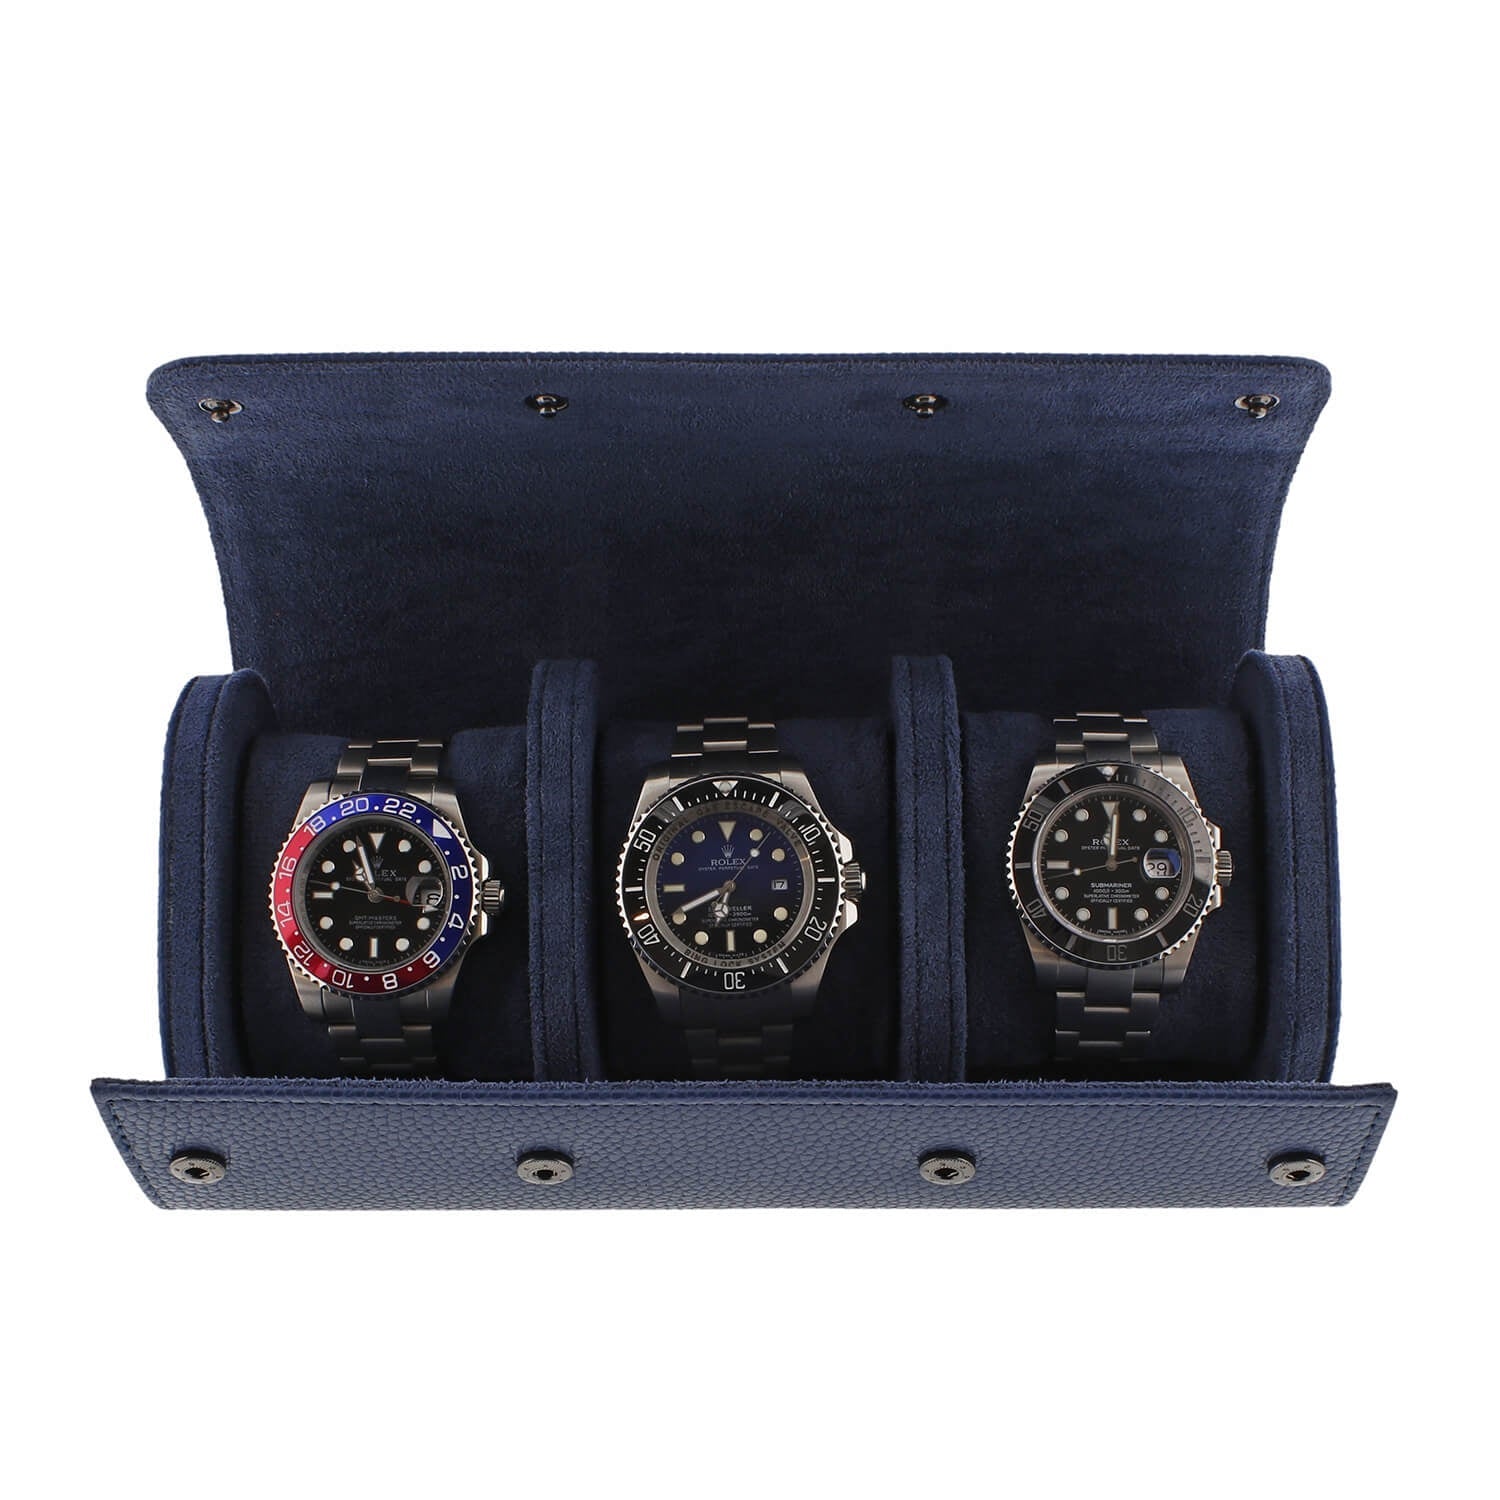 Aevitas Watch Travel Case Review: How to Choose the Best One for Your Watches